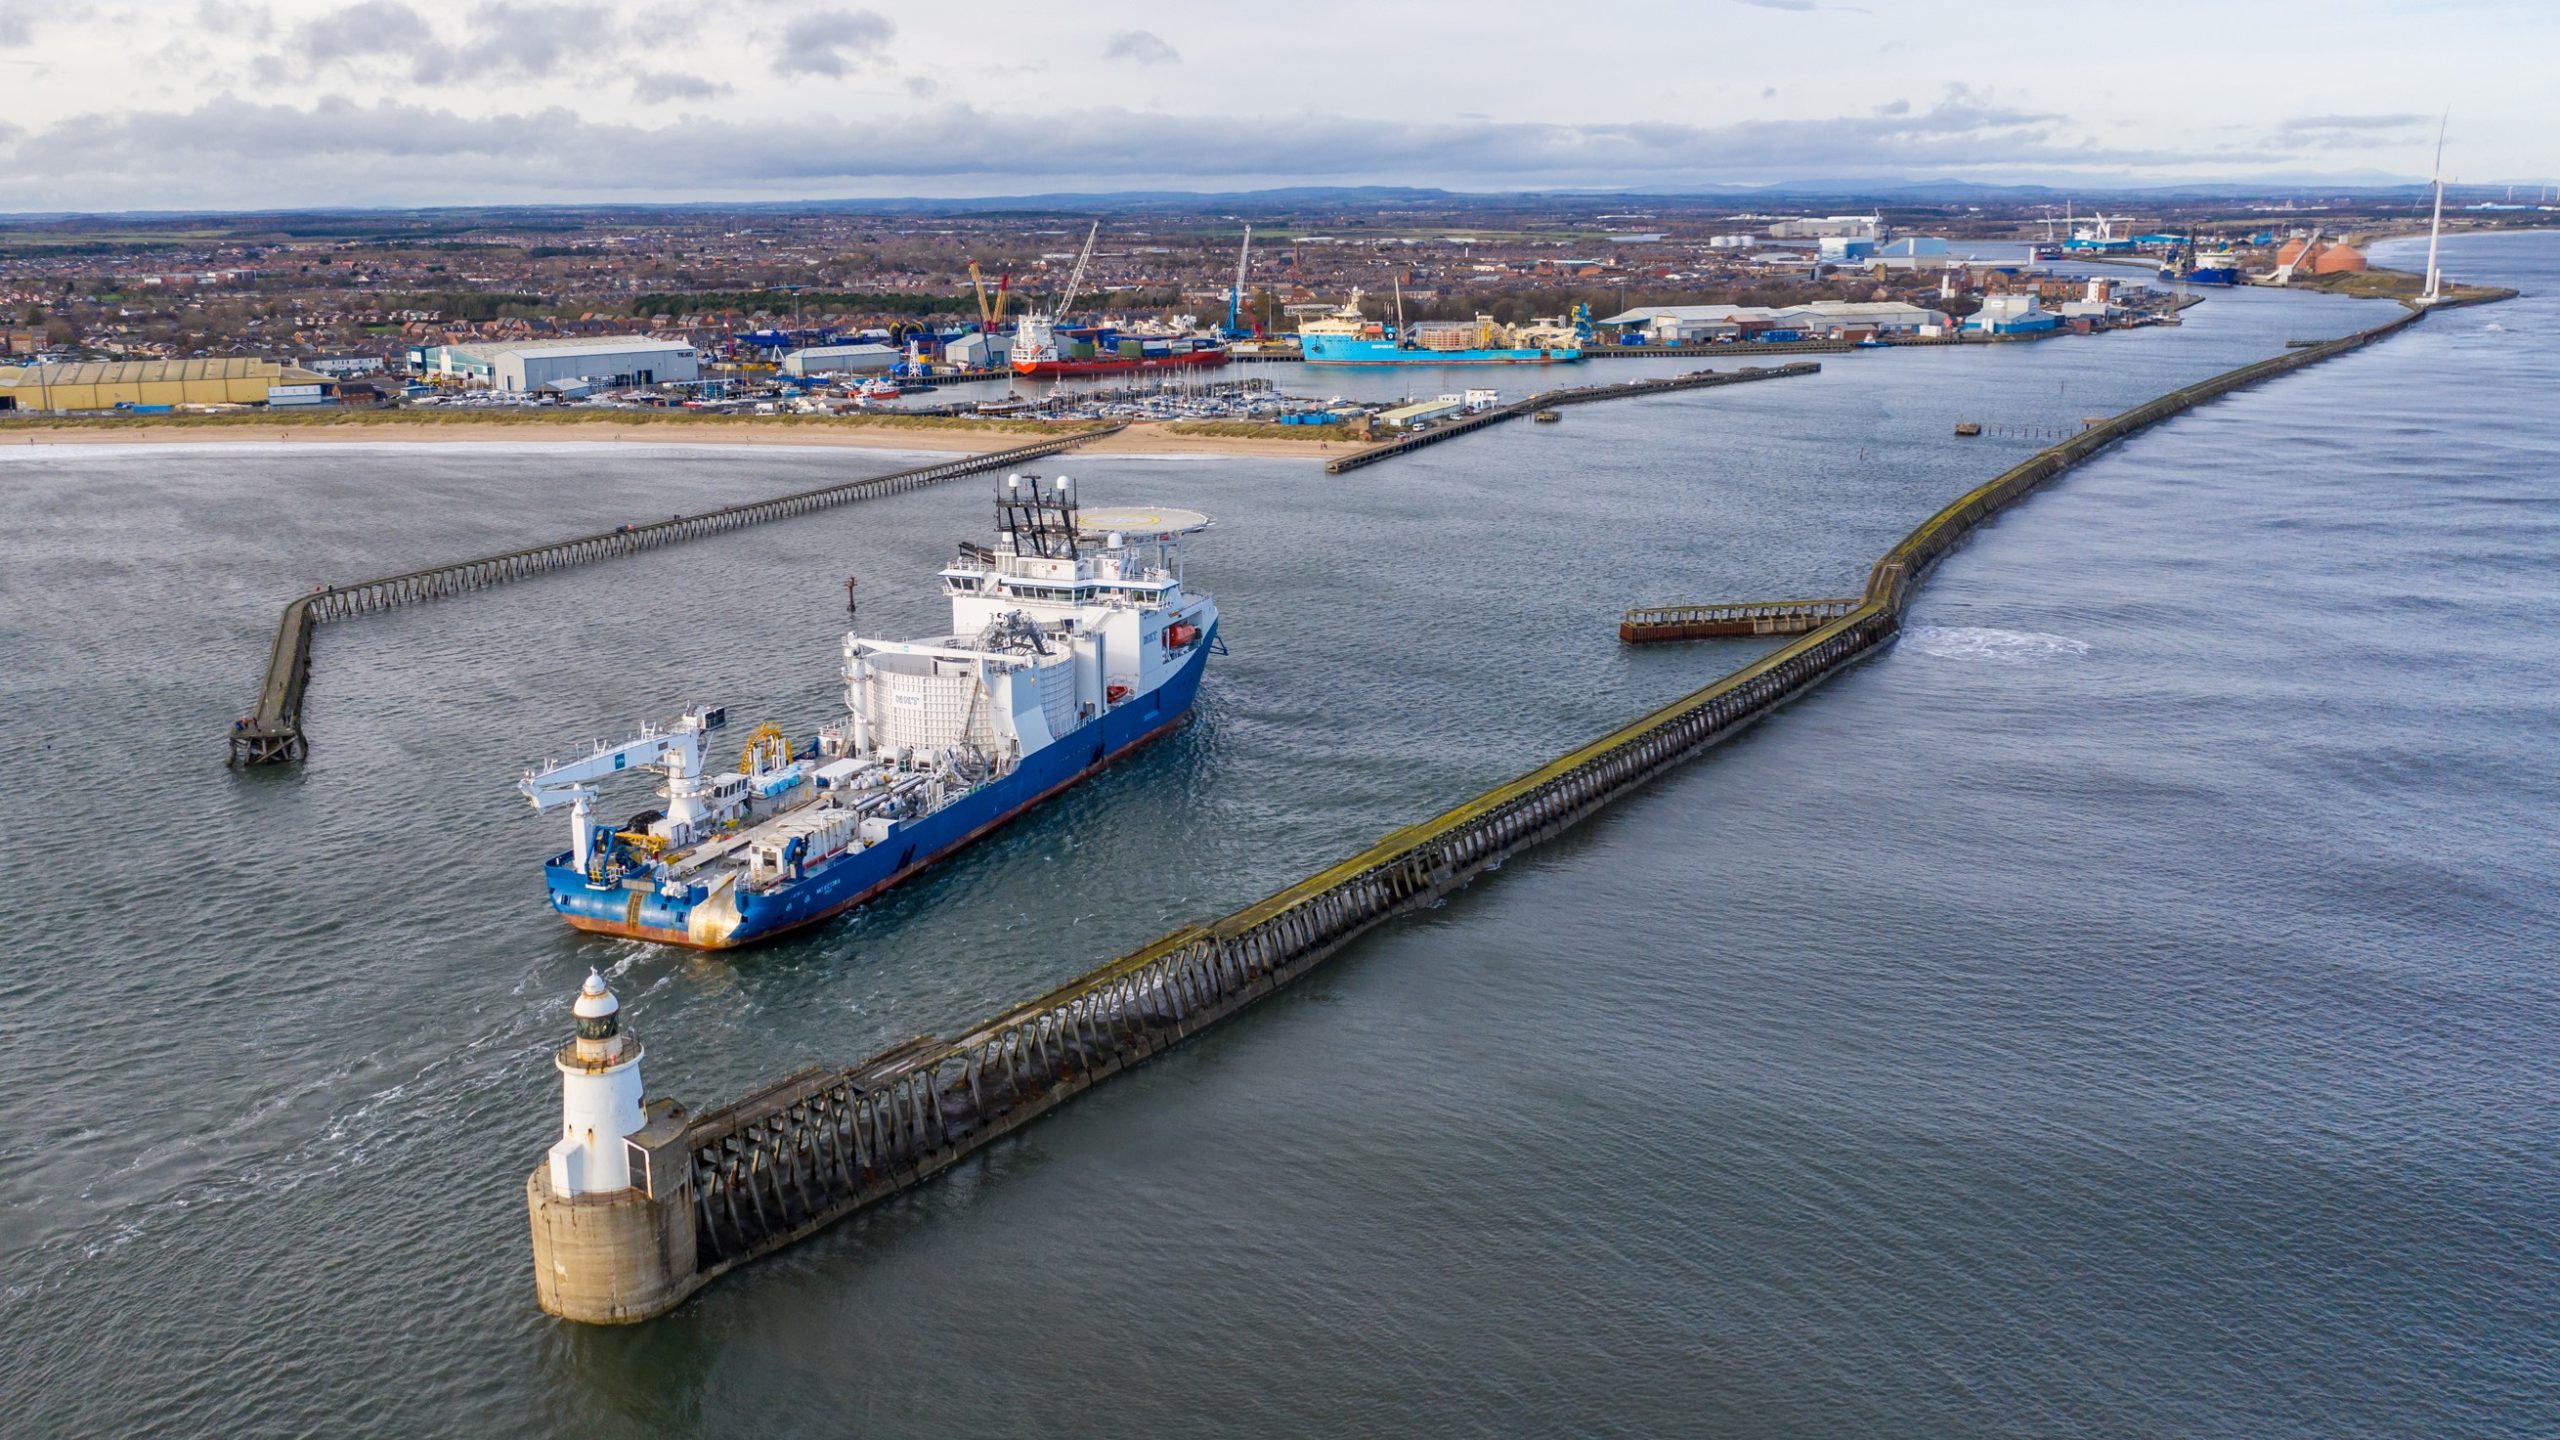 Investment and Expansion at Port of Blyth